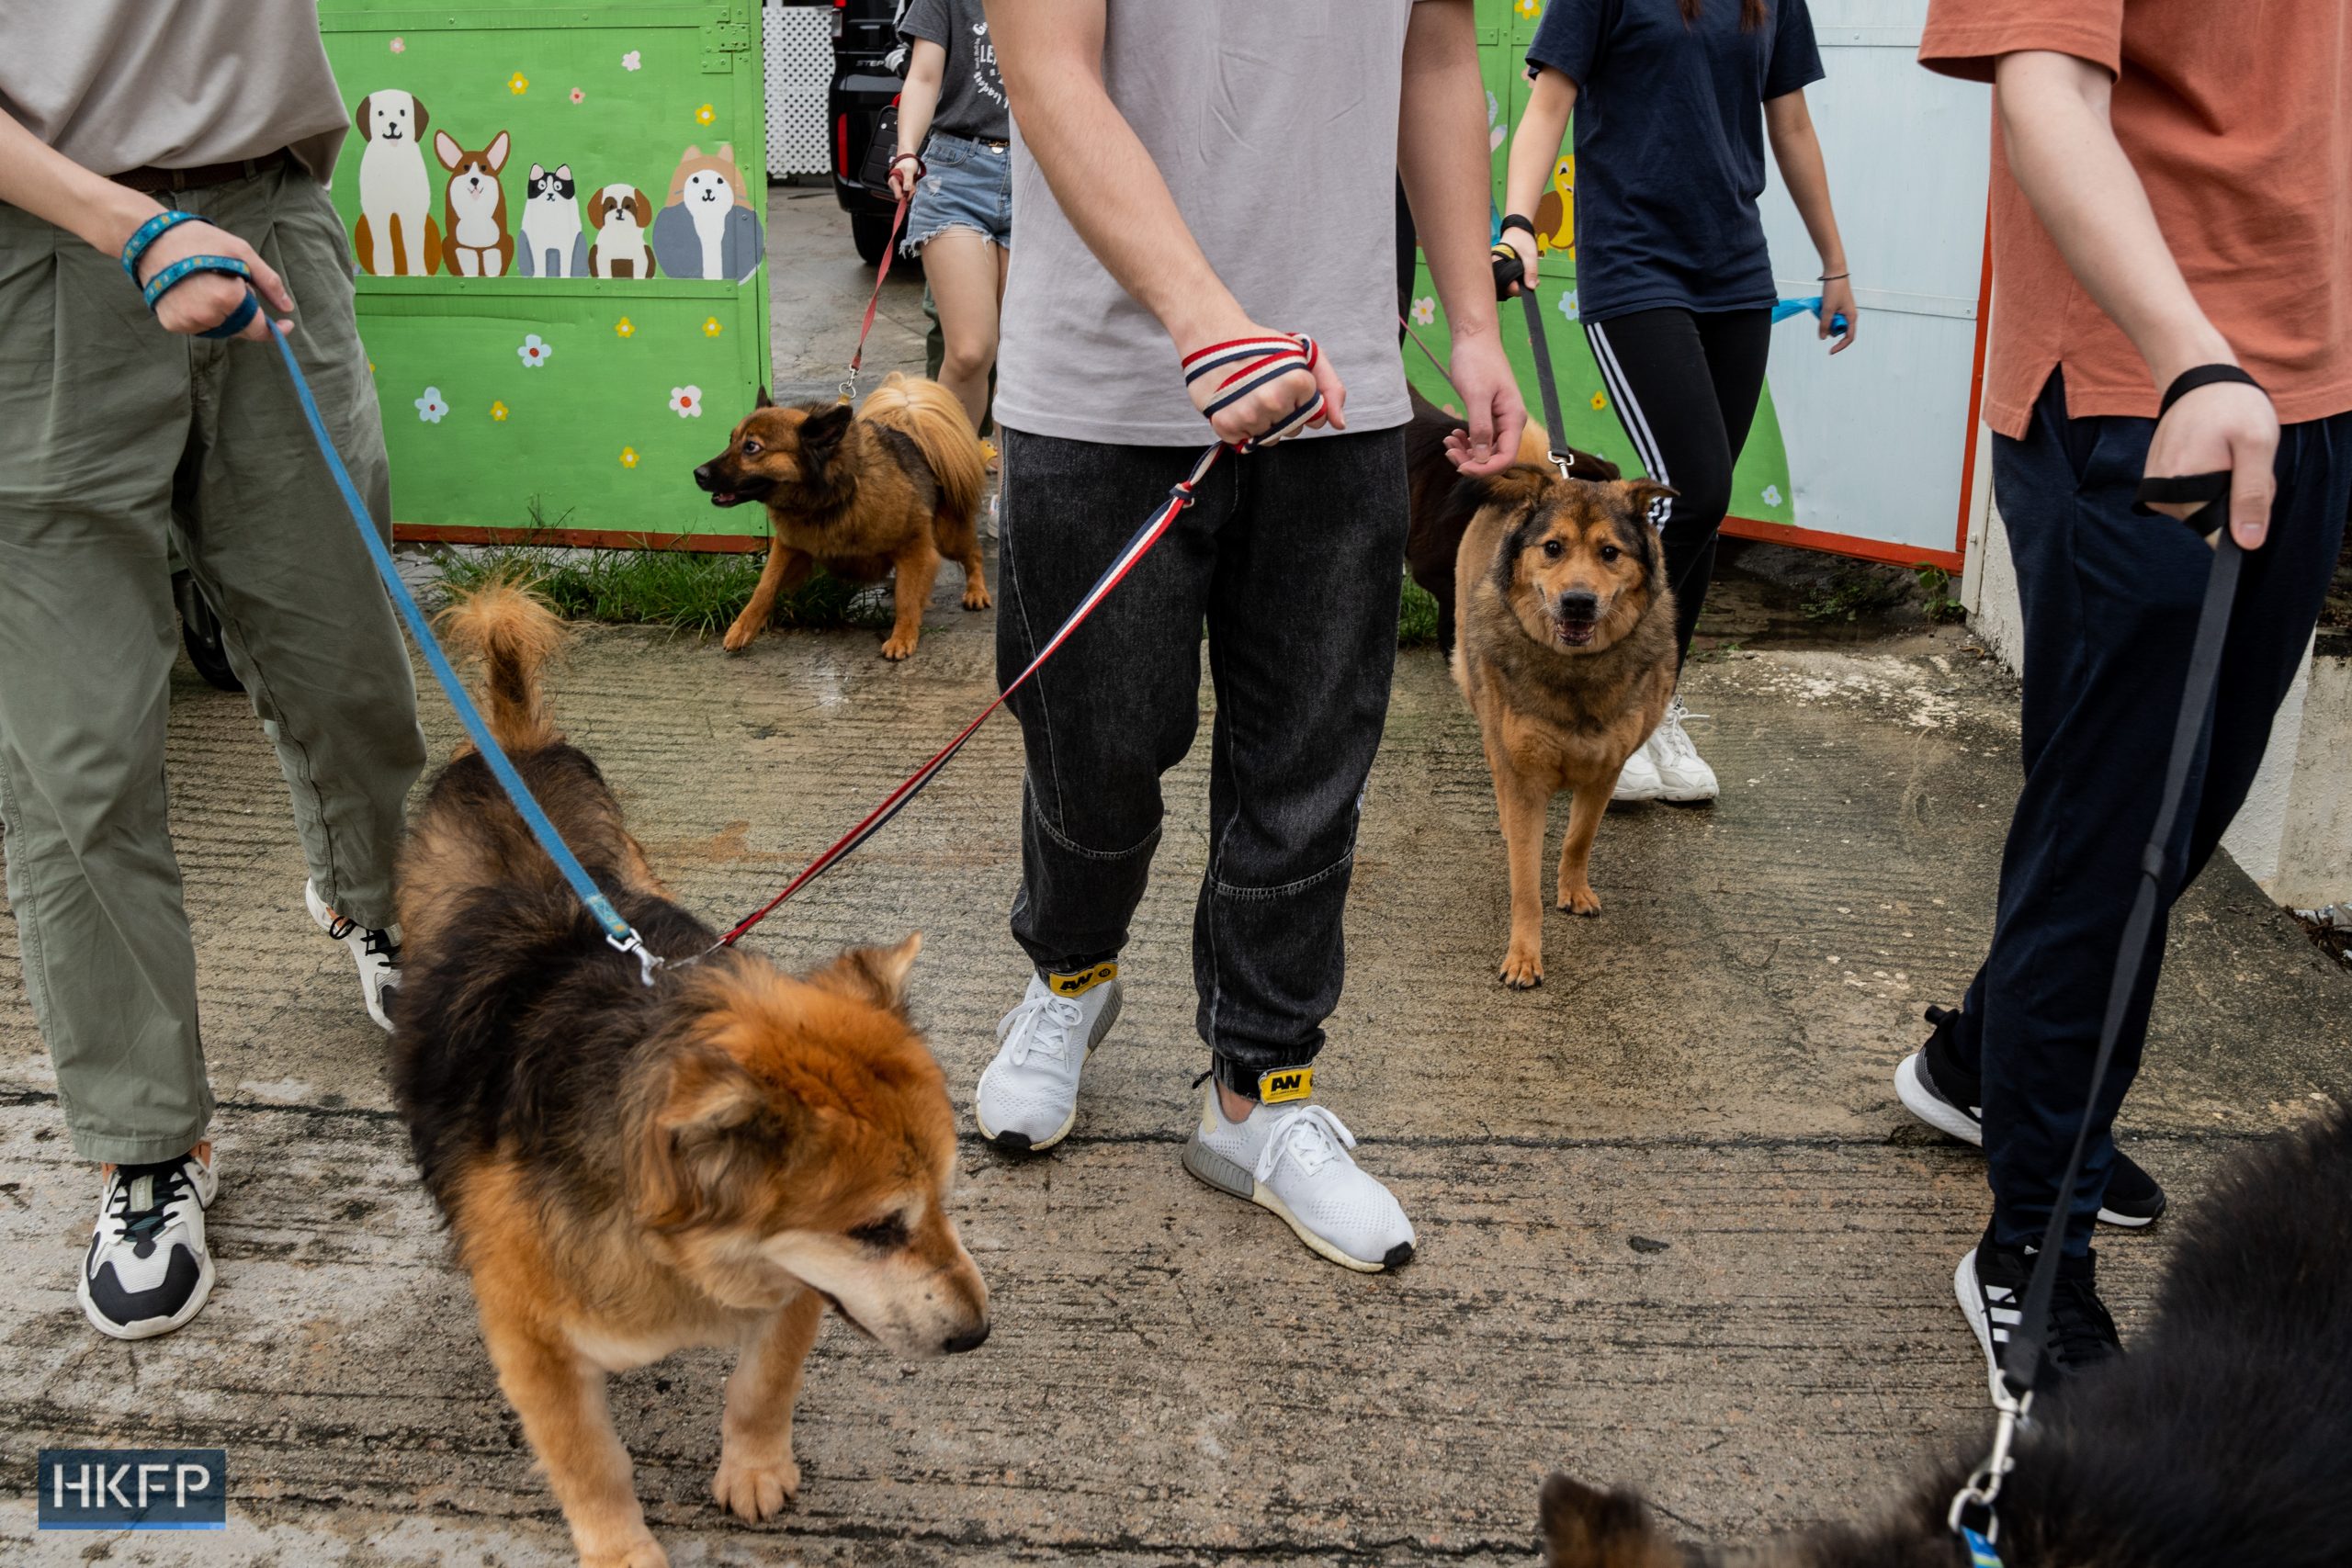 A group of university students visit the stray animal shelter House of Joy and Mercy in Yuen Long to volunteer with the animals, on May 8, 2023. Photo: Kyle Lam/HKFP.